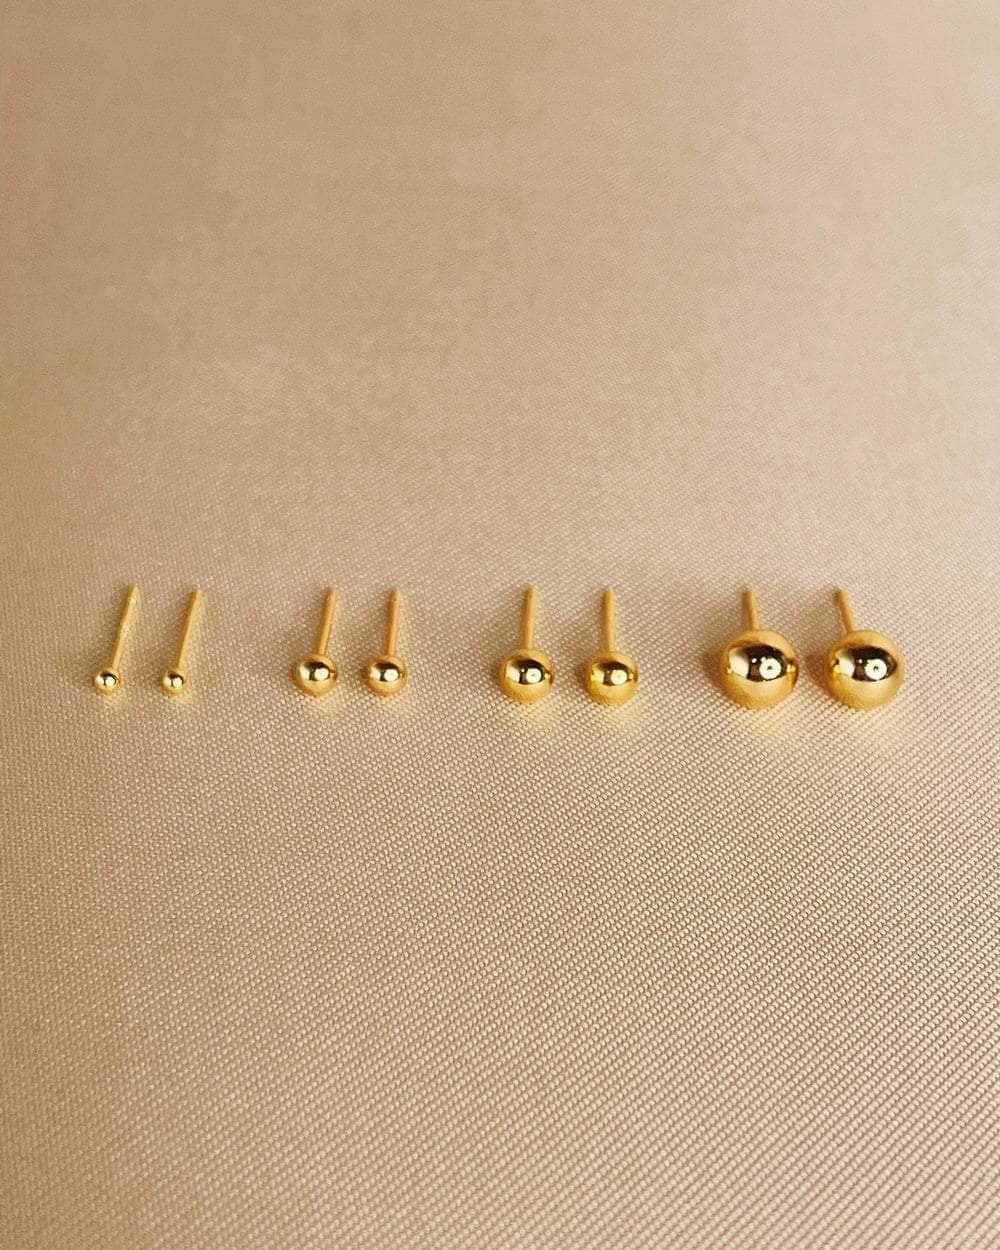 So Dainty Co. Studs Ivy Gold Studs (Choose 1 — 2mm / 3mm / 4mm / 6mm) Gold Plated 925 Sterling Silver Jewelry